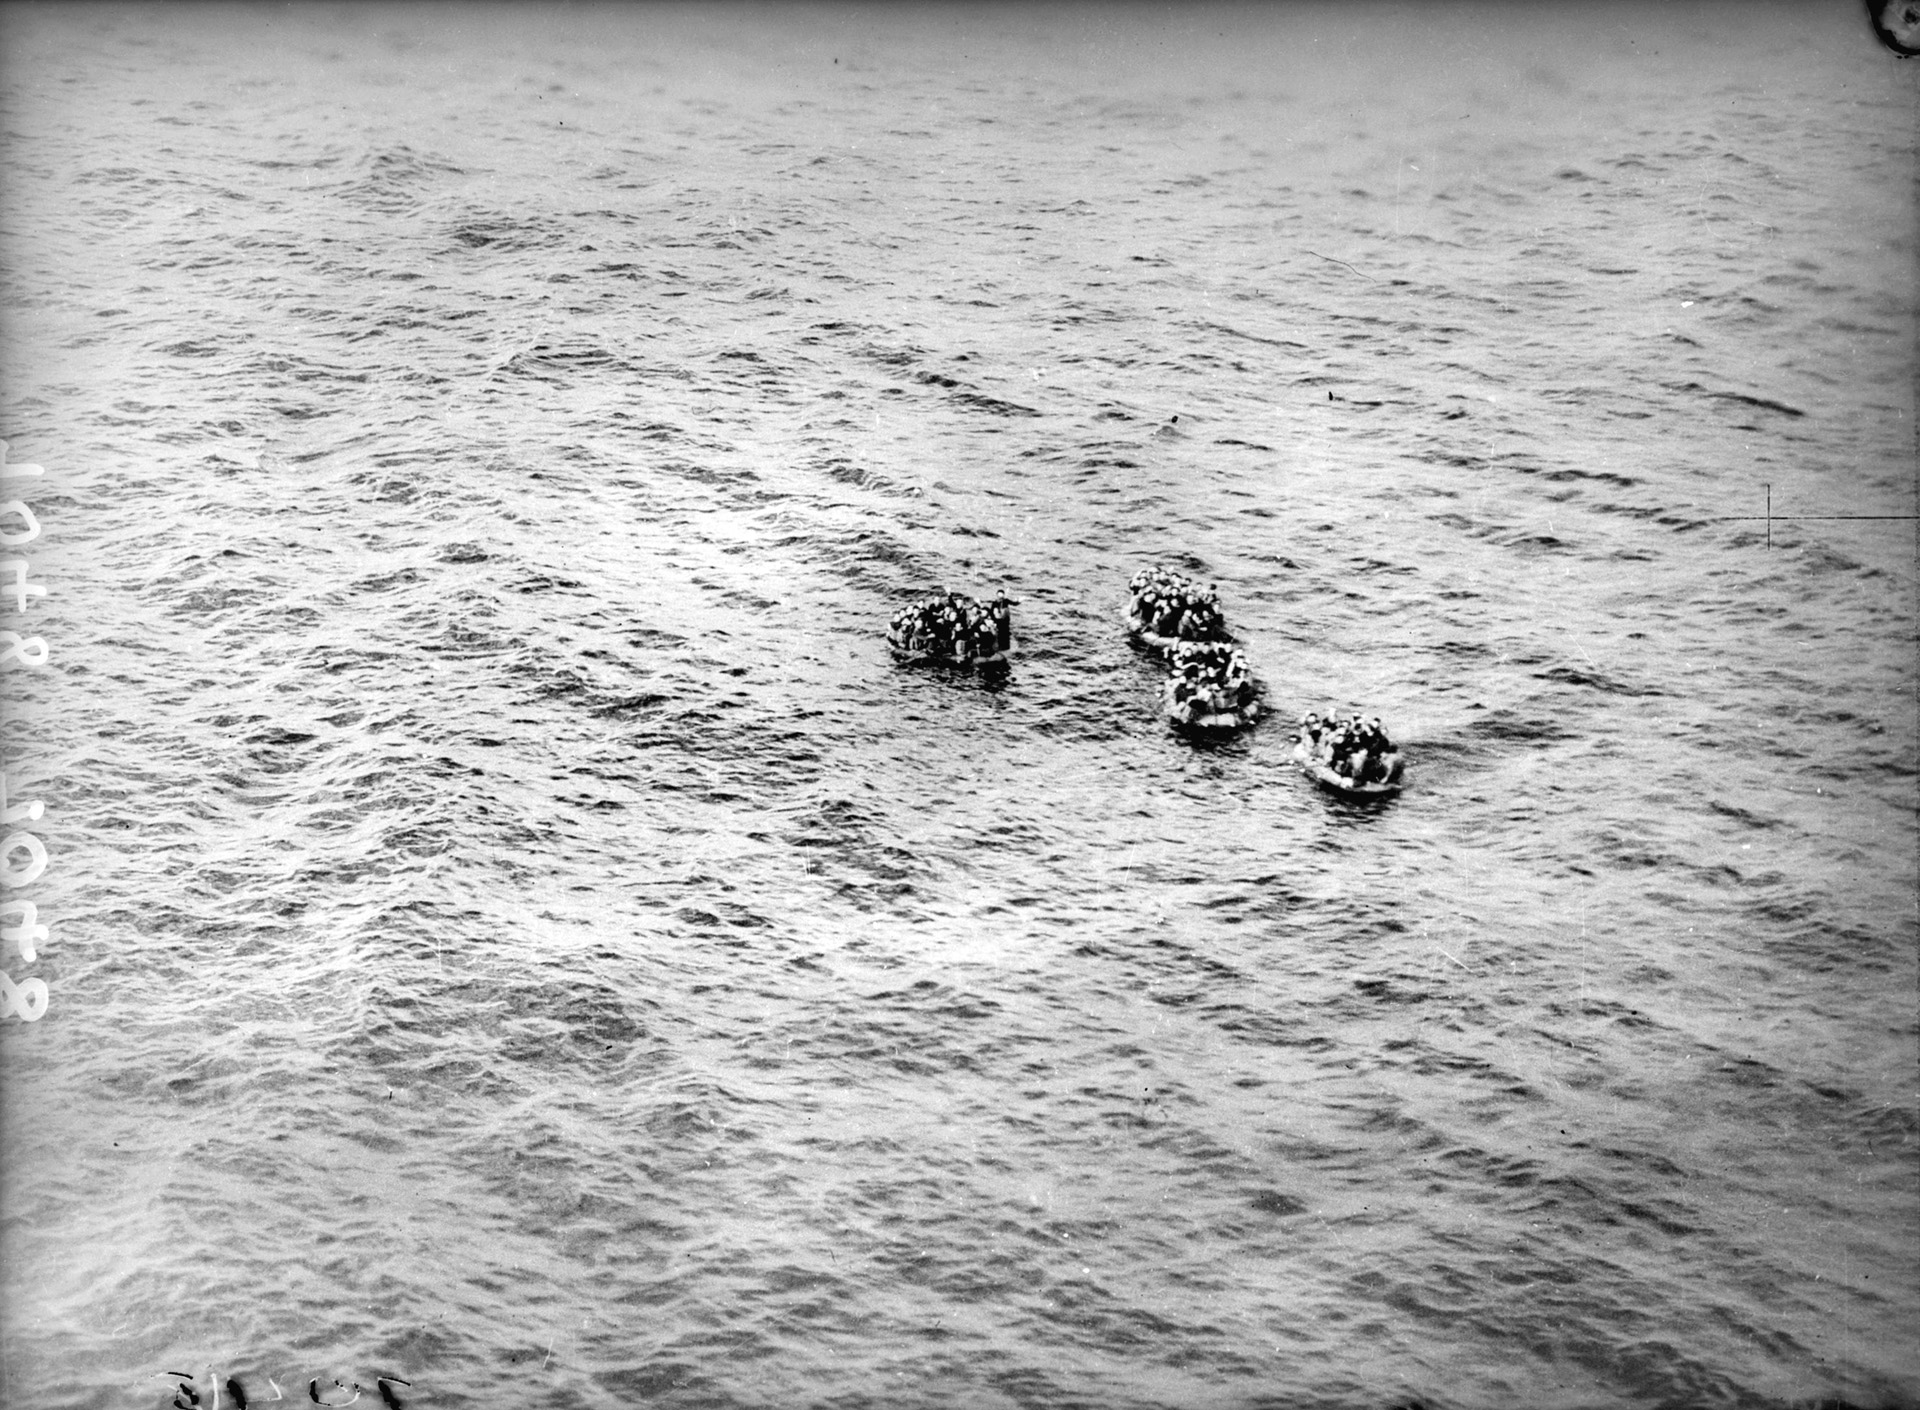 Italian sailors, survivors of the Battle of Cape Matapan, float in the Mediterranean Sea. The position of the survivors was relayed to Italian authorities, and a hospital ship was directed toward the  location to rescue them.